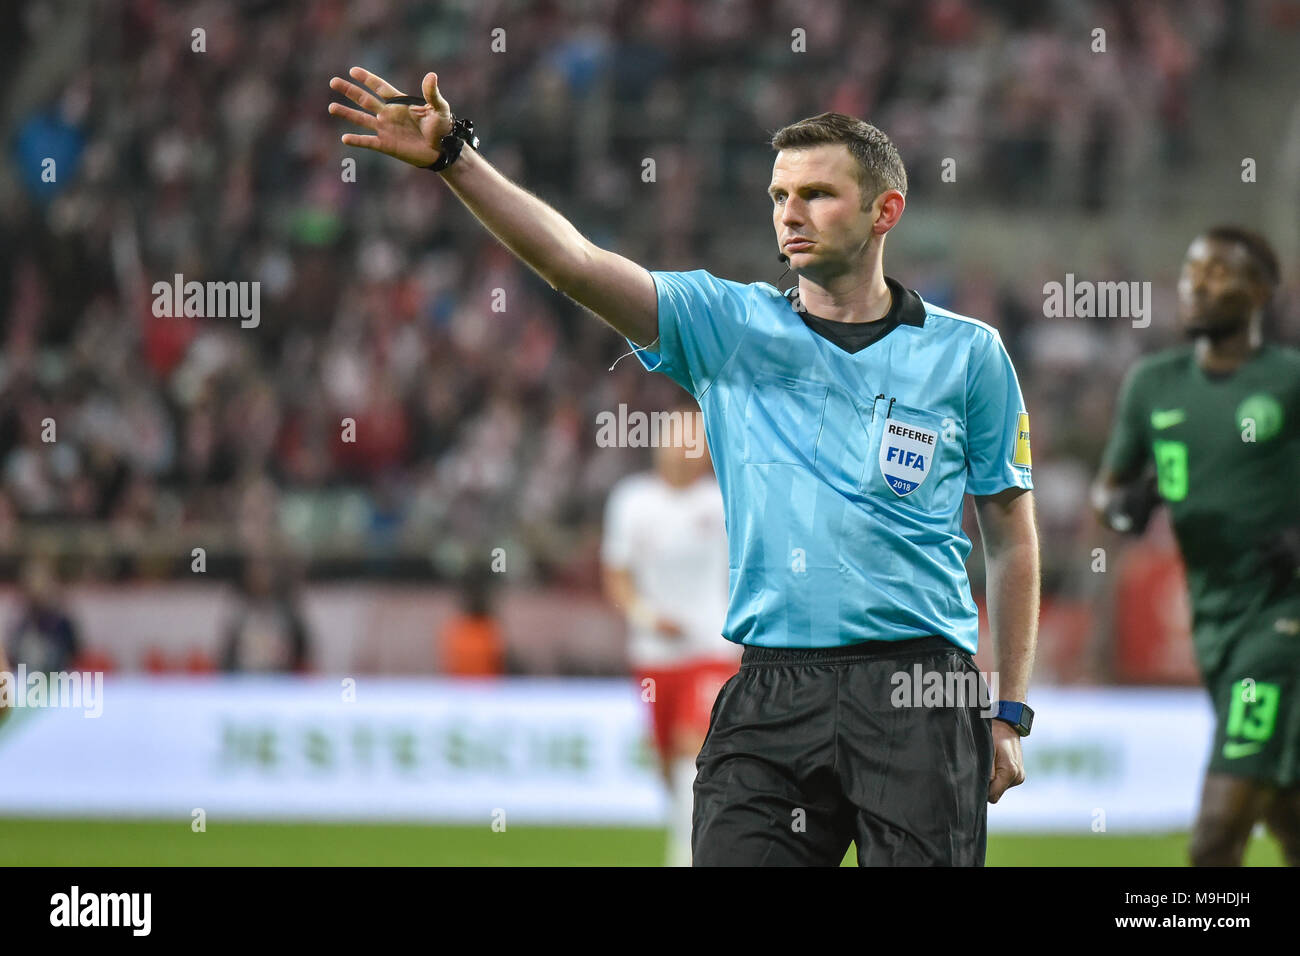 WROCLAW, POLAND - MARCH 23, 2018: Friendly match Poland vs Nigeria 0:1. In action Michael Oliver main referee. Stock Photo